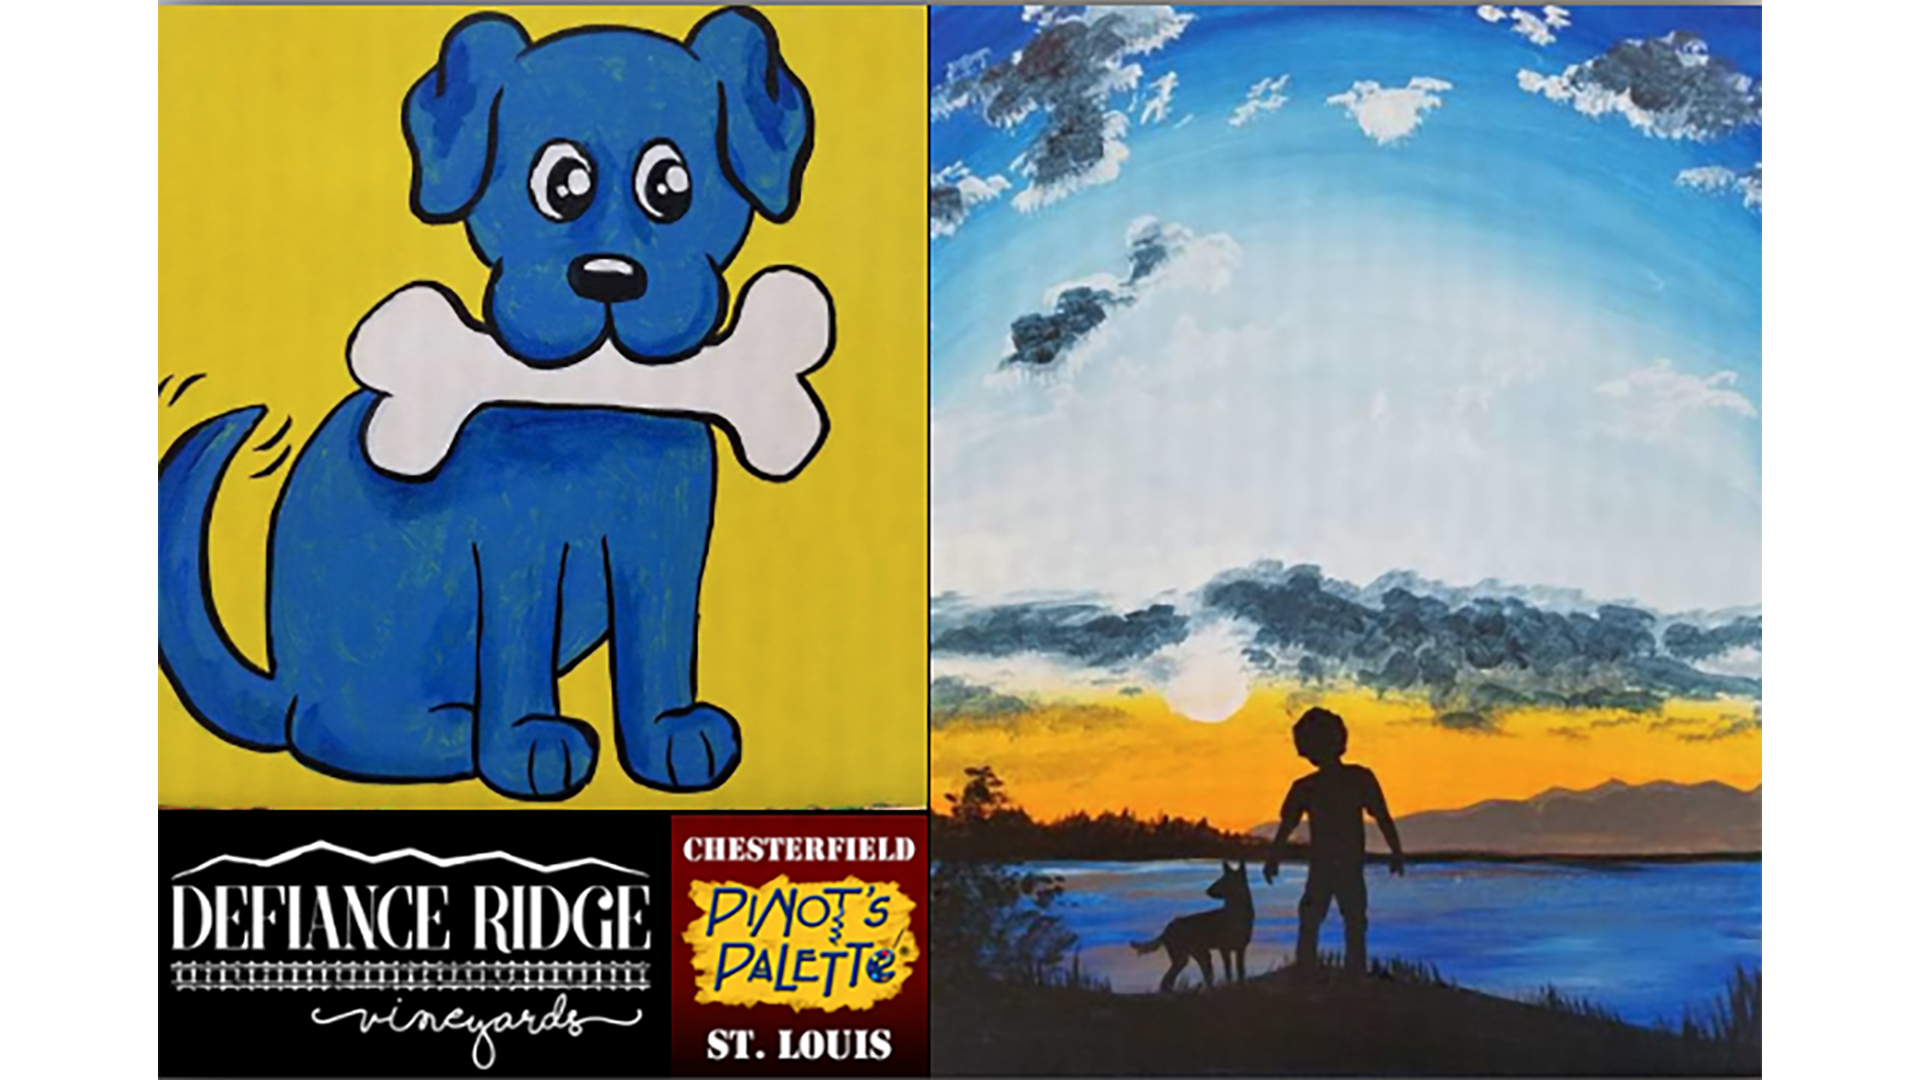 Paint with Your Pooch at Defiance Ridge Vineyards